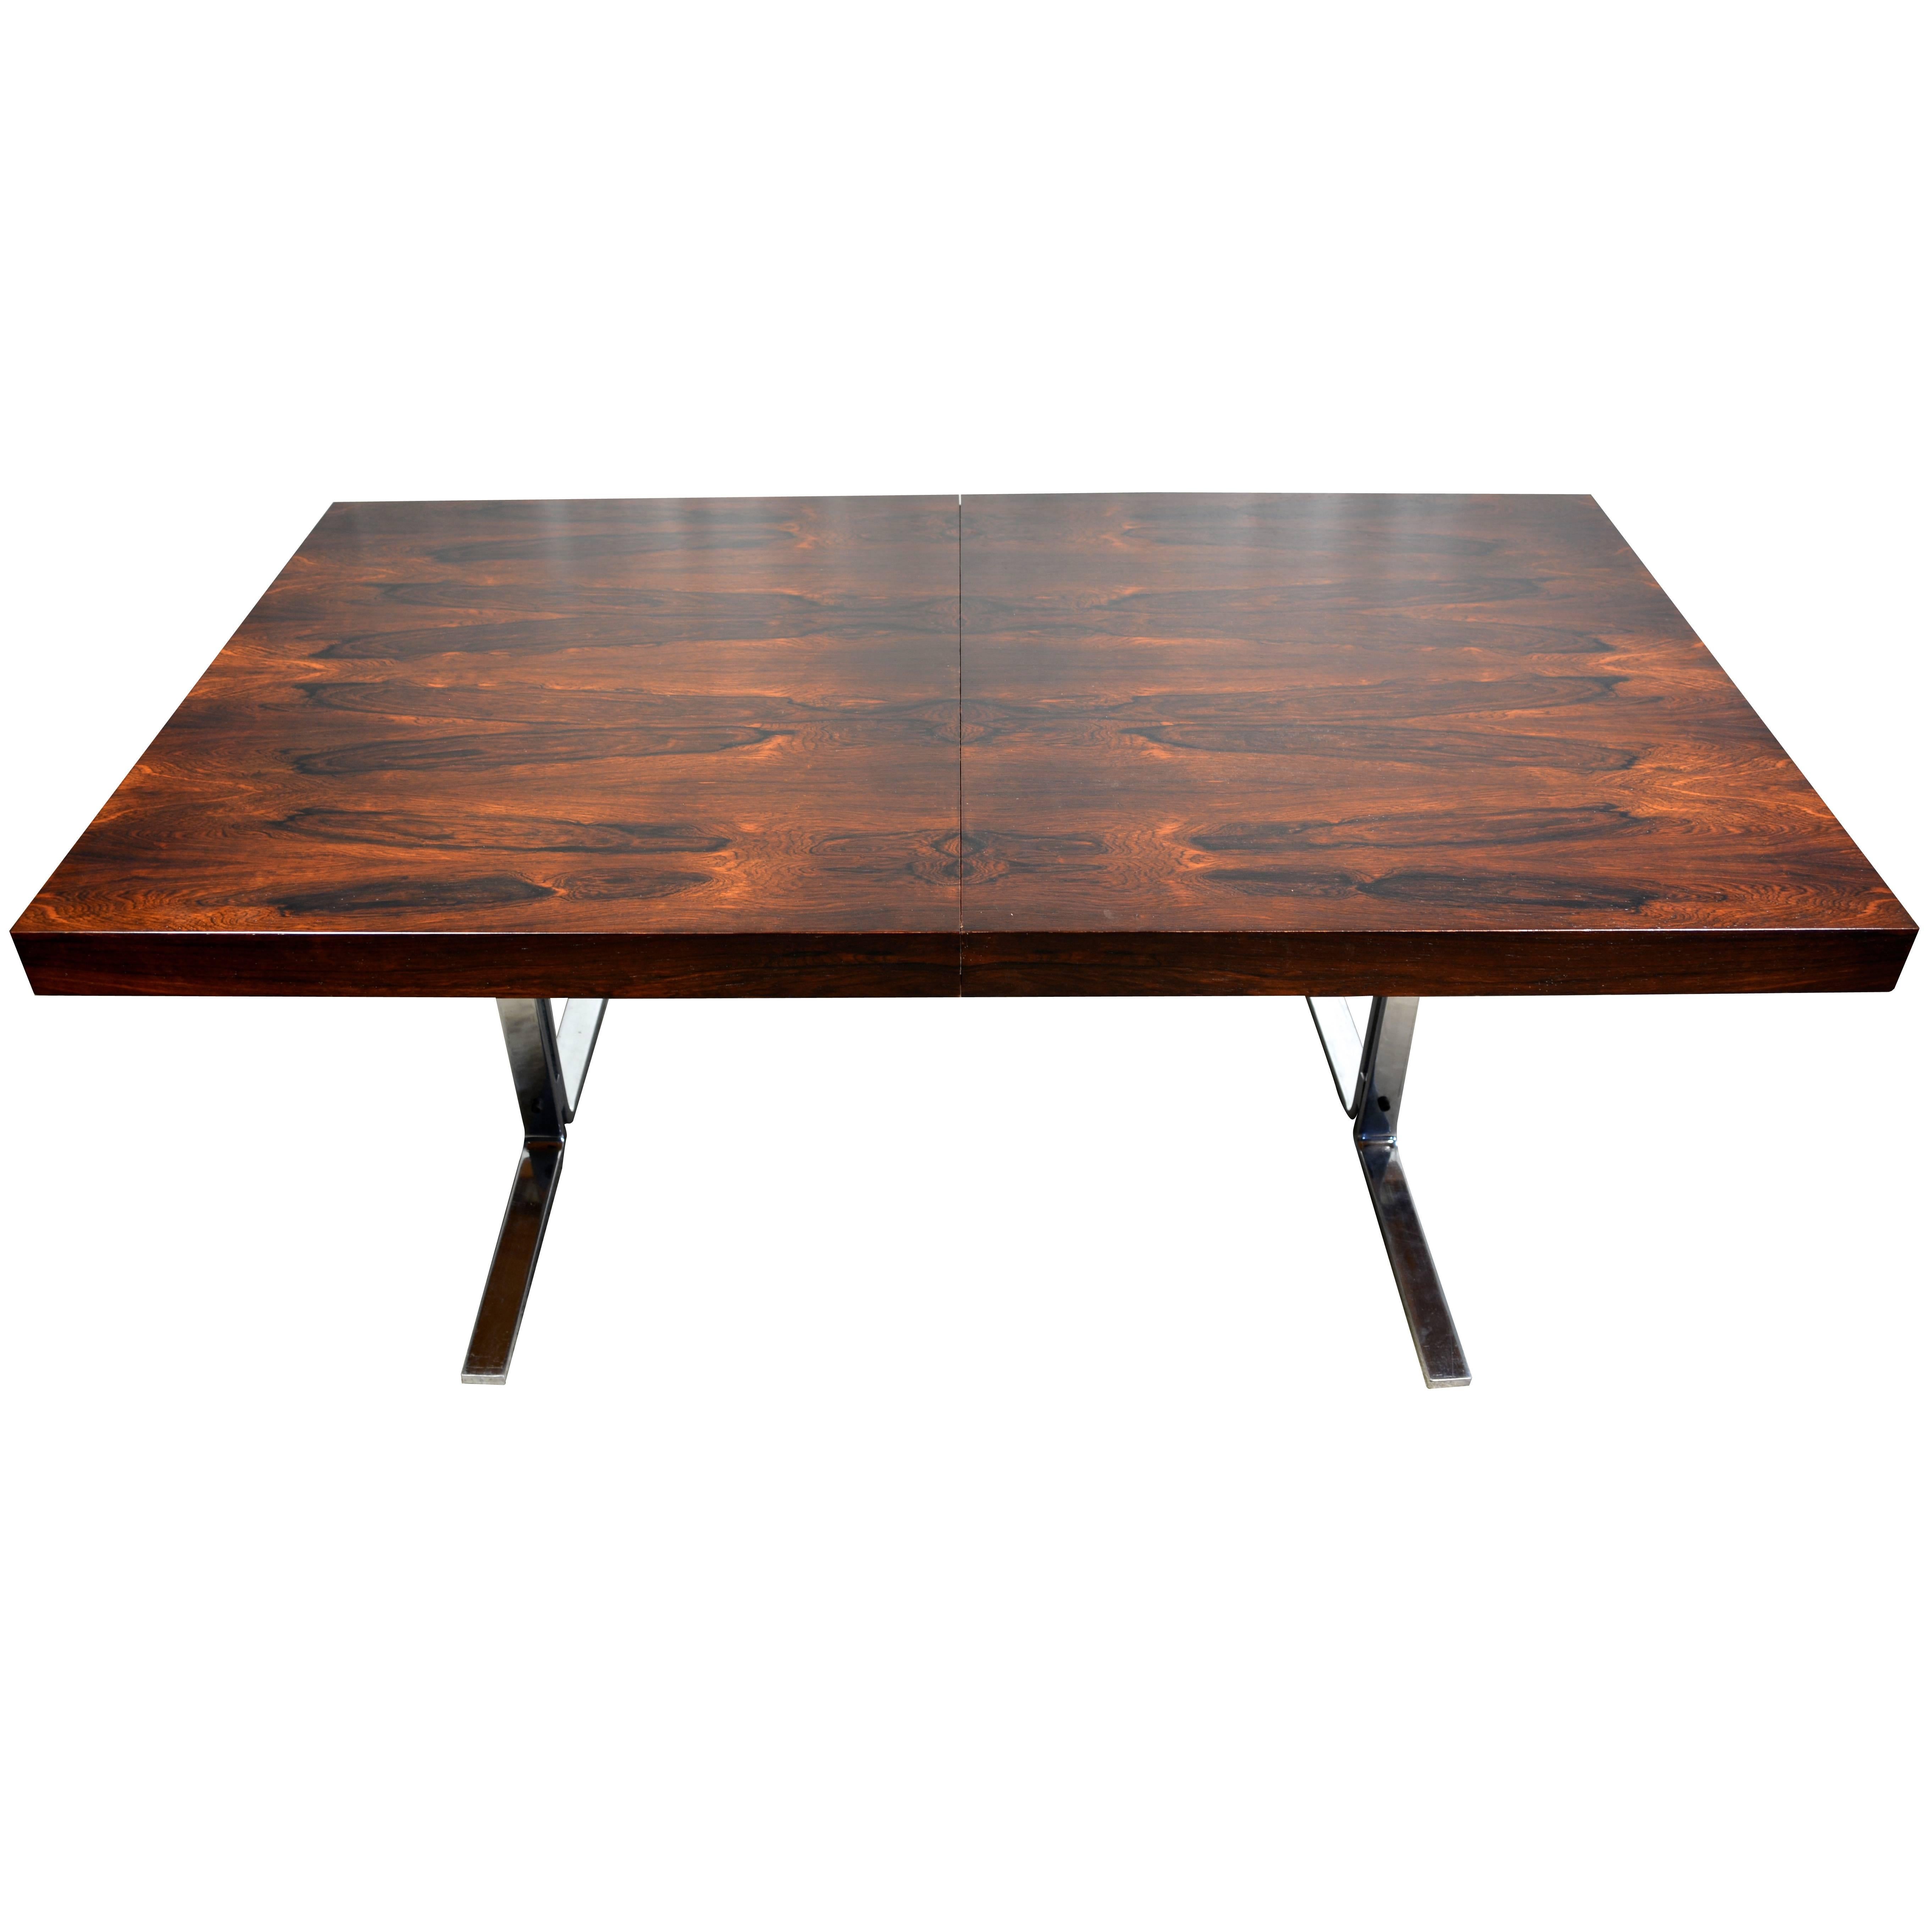 Georg Petersens Rosewood and Chrome Danish Modern Dining Table